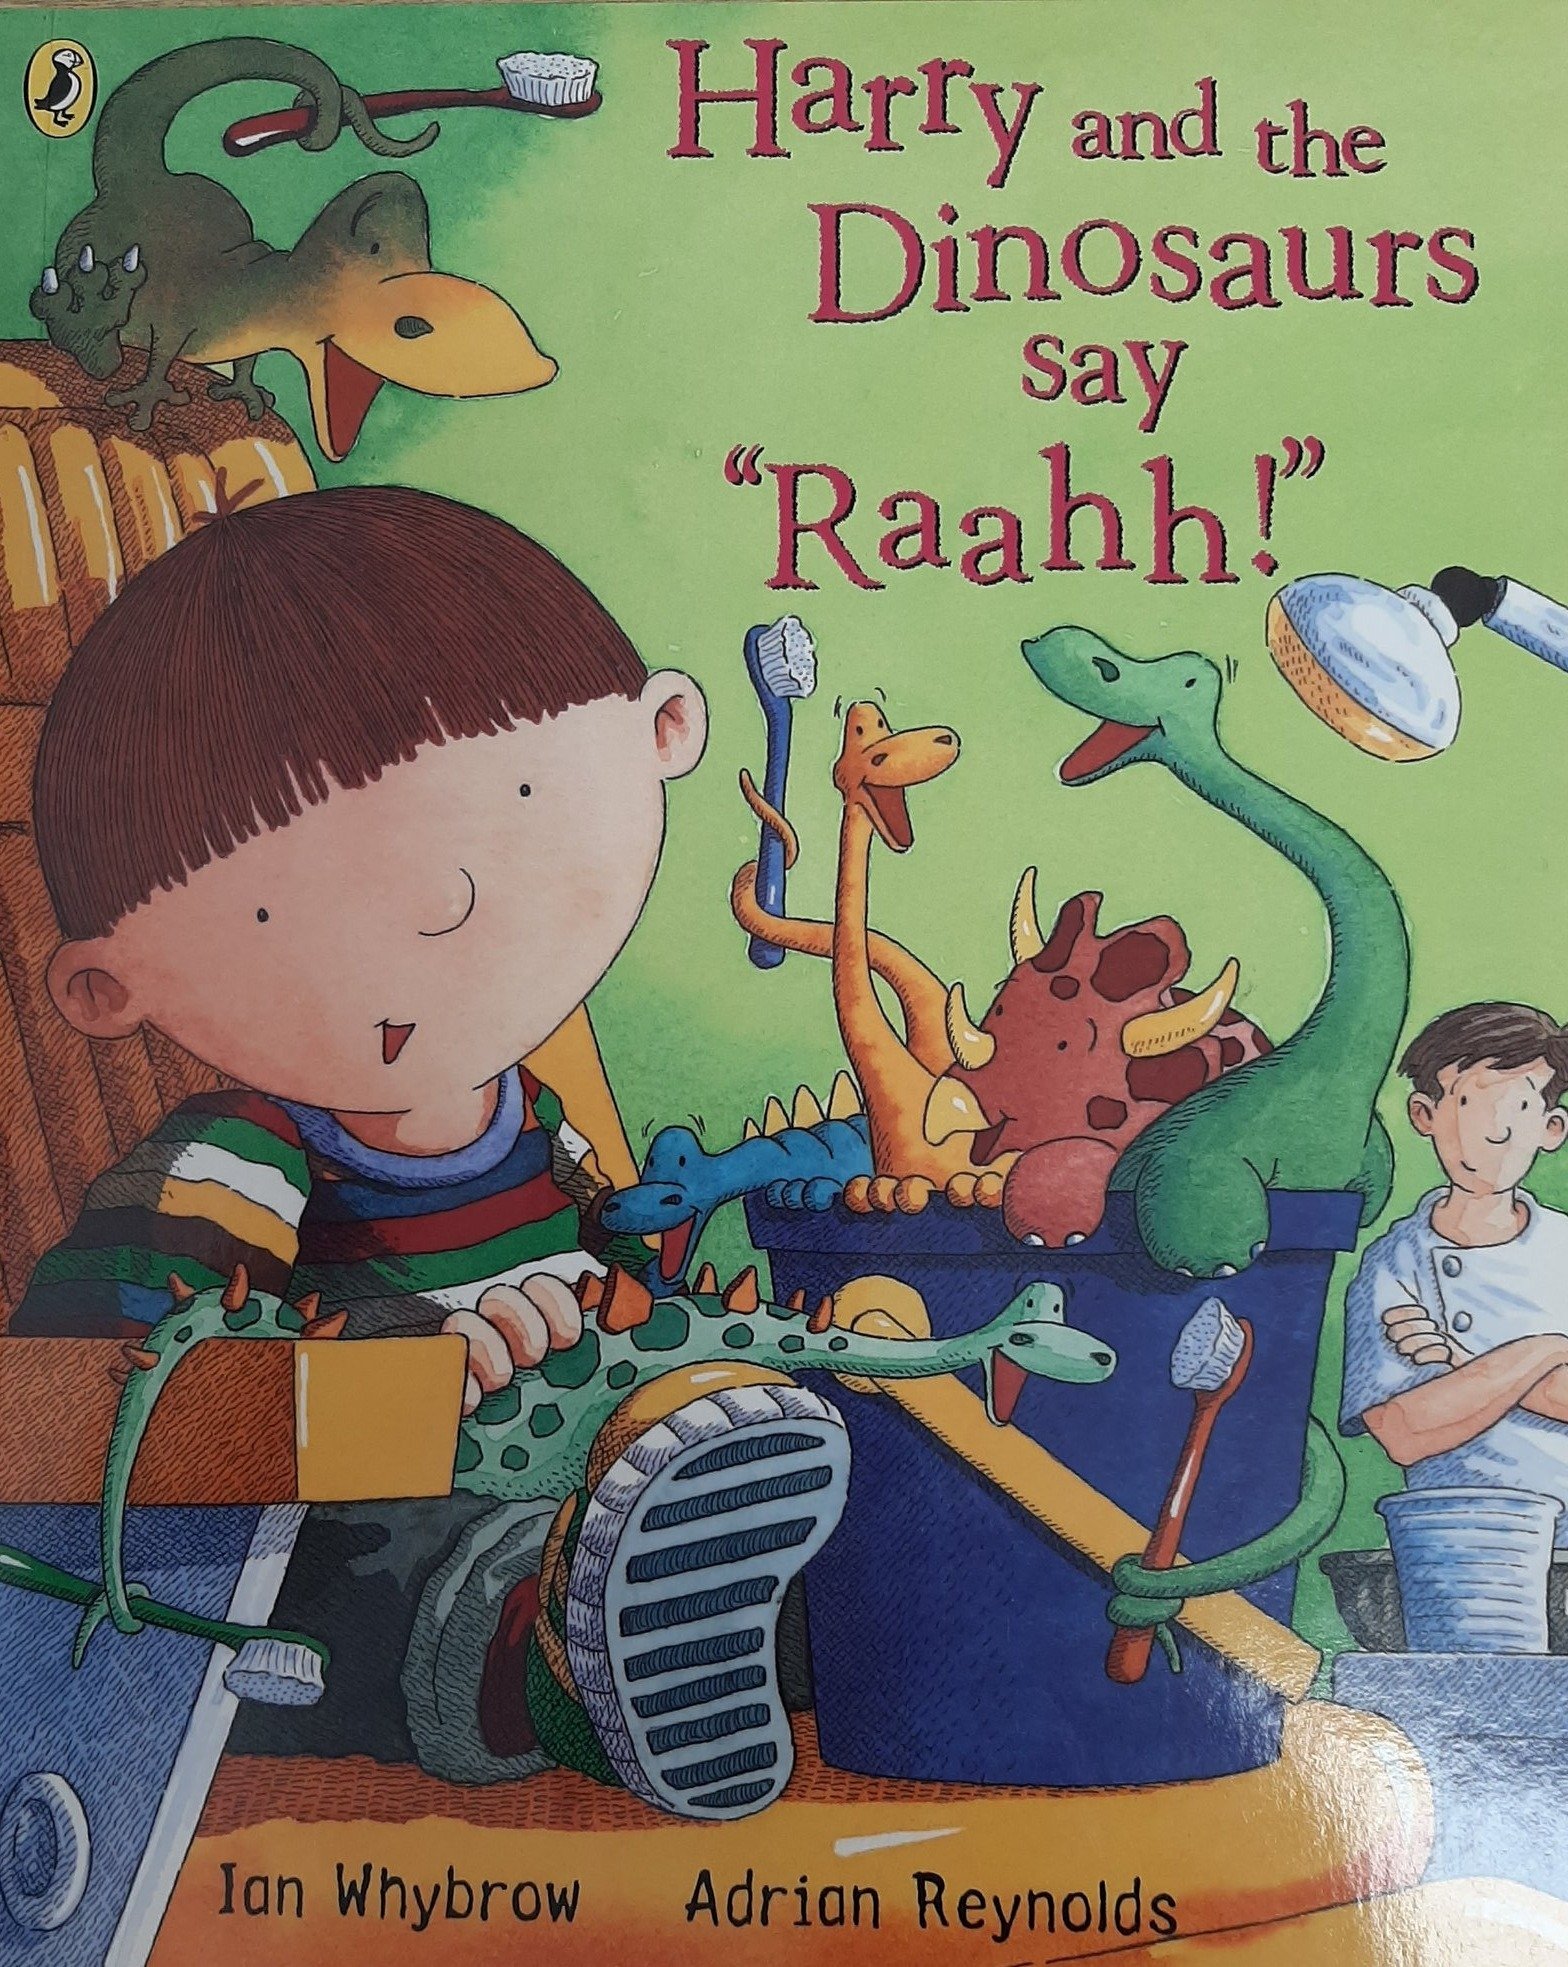 Harry and the Dinosaurs - image of book cover